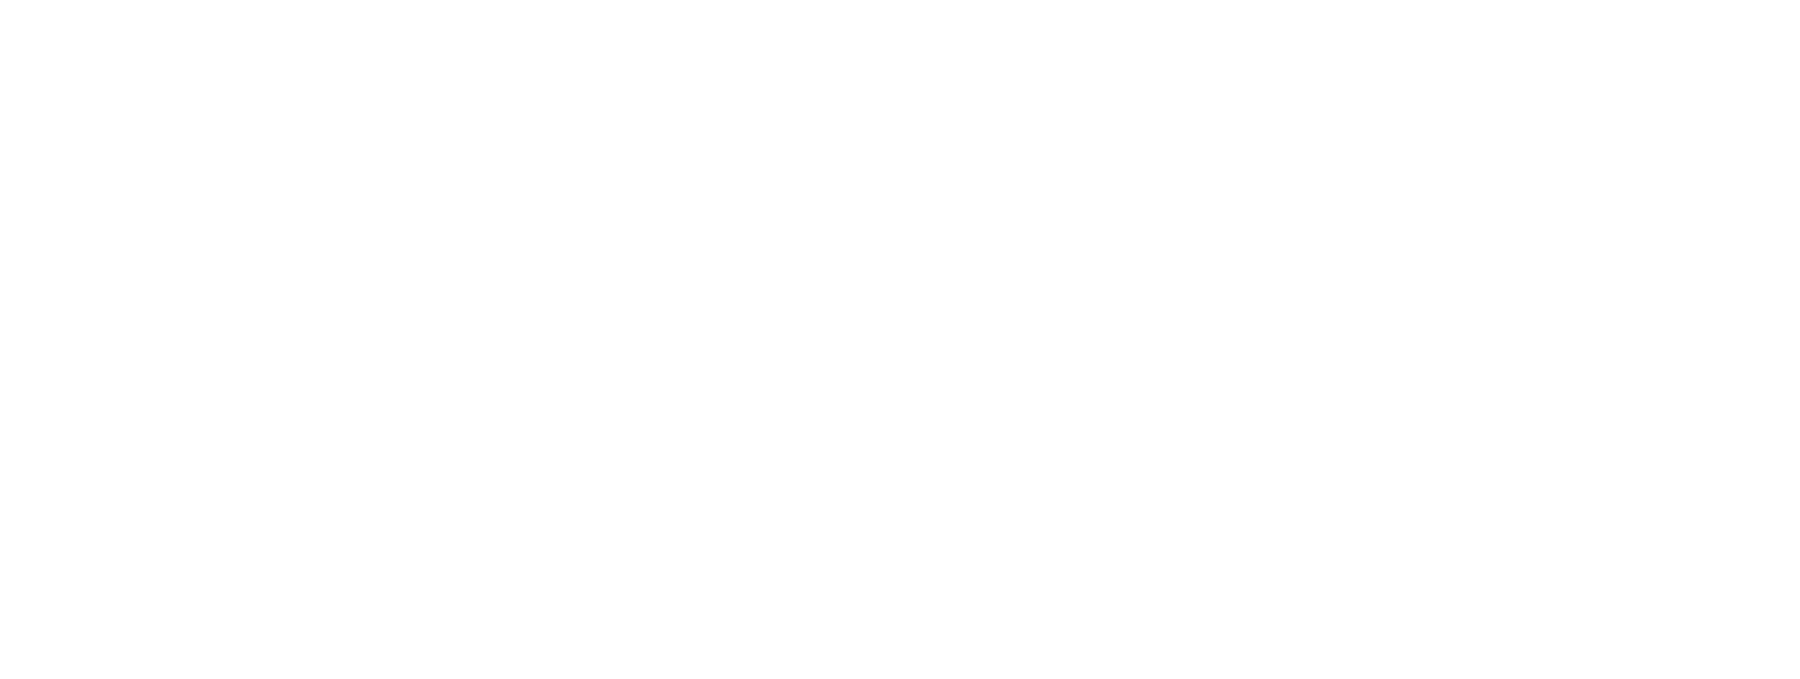 90 Day Bares All